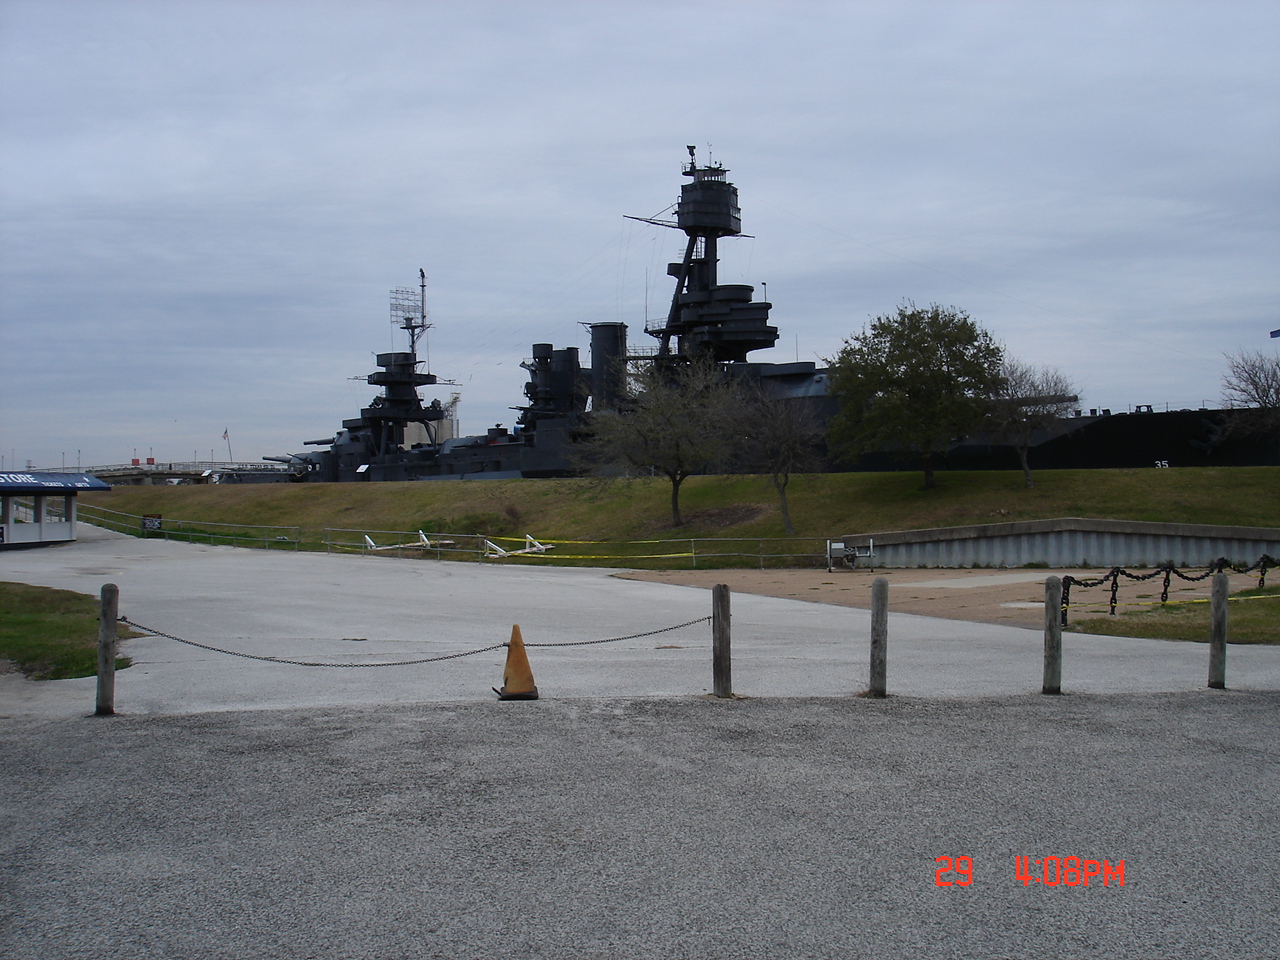 Side of battleship Texas as seen from the visitors' parking lot, note the Measure 21 camoflage, Texas, United States, 2007